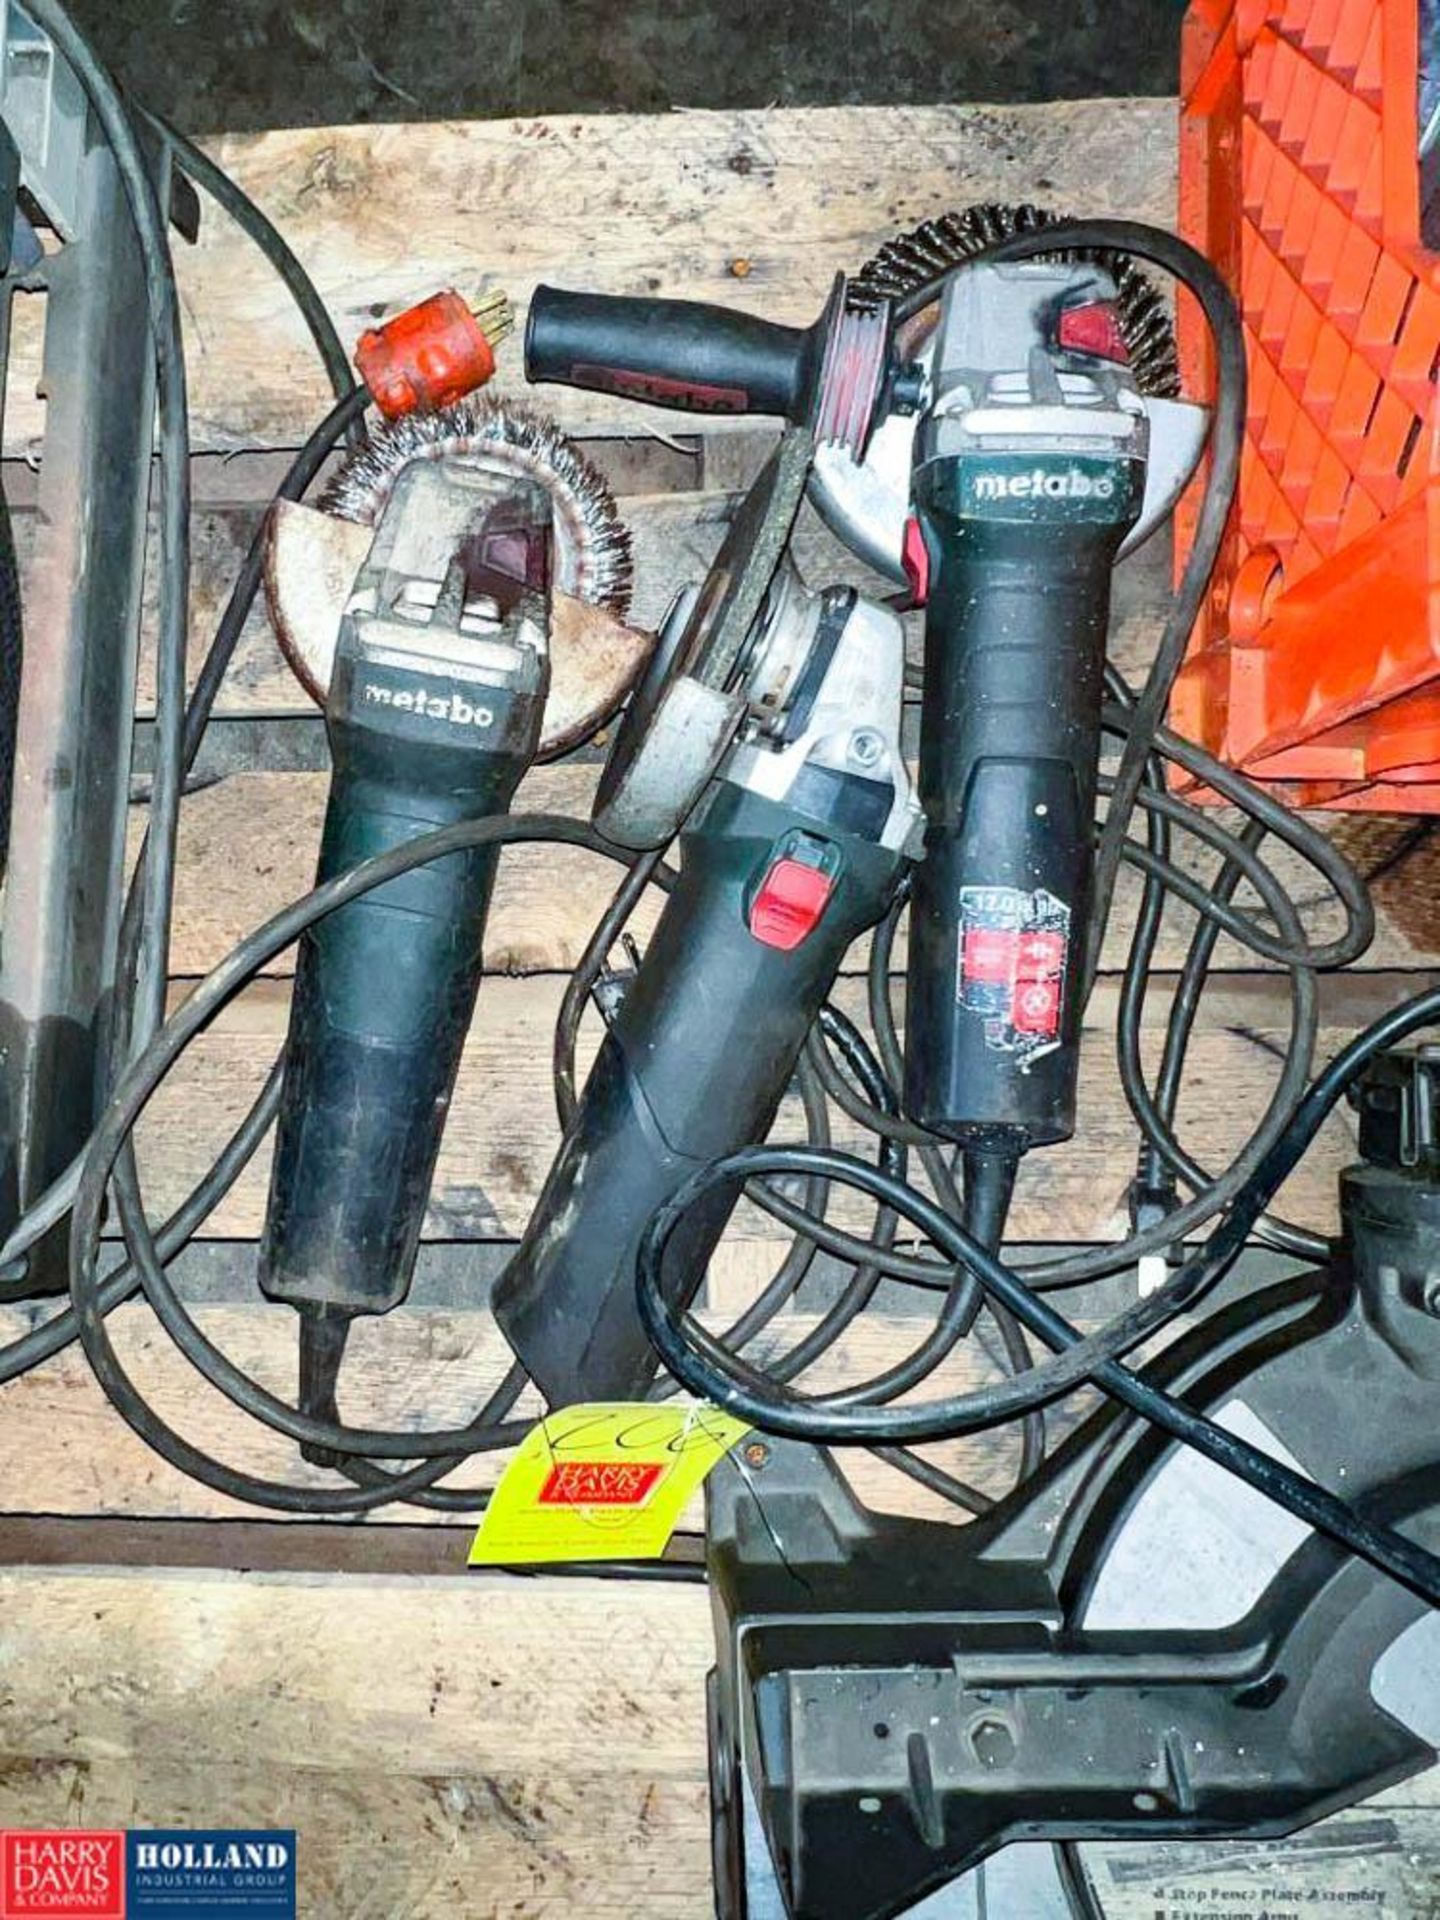 (3) Metabo Grinder with Assorted Grinding Wheels